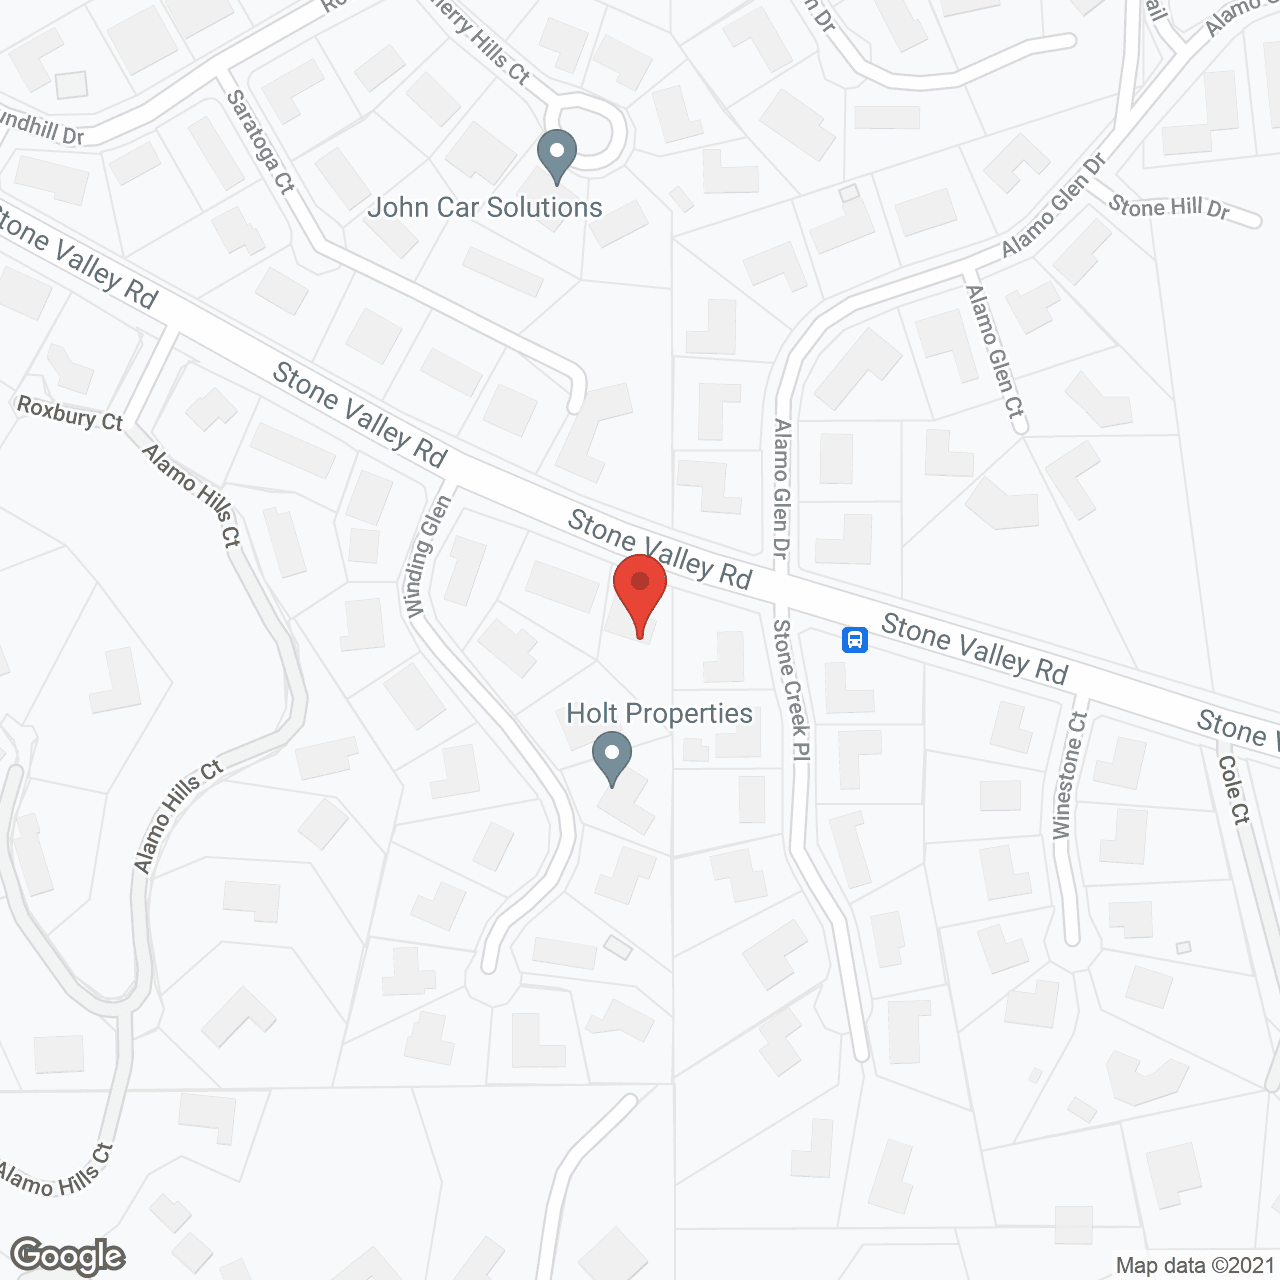 Gines Residential Care Home III in google map